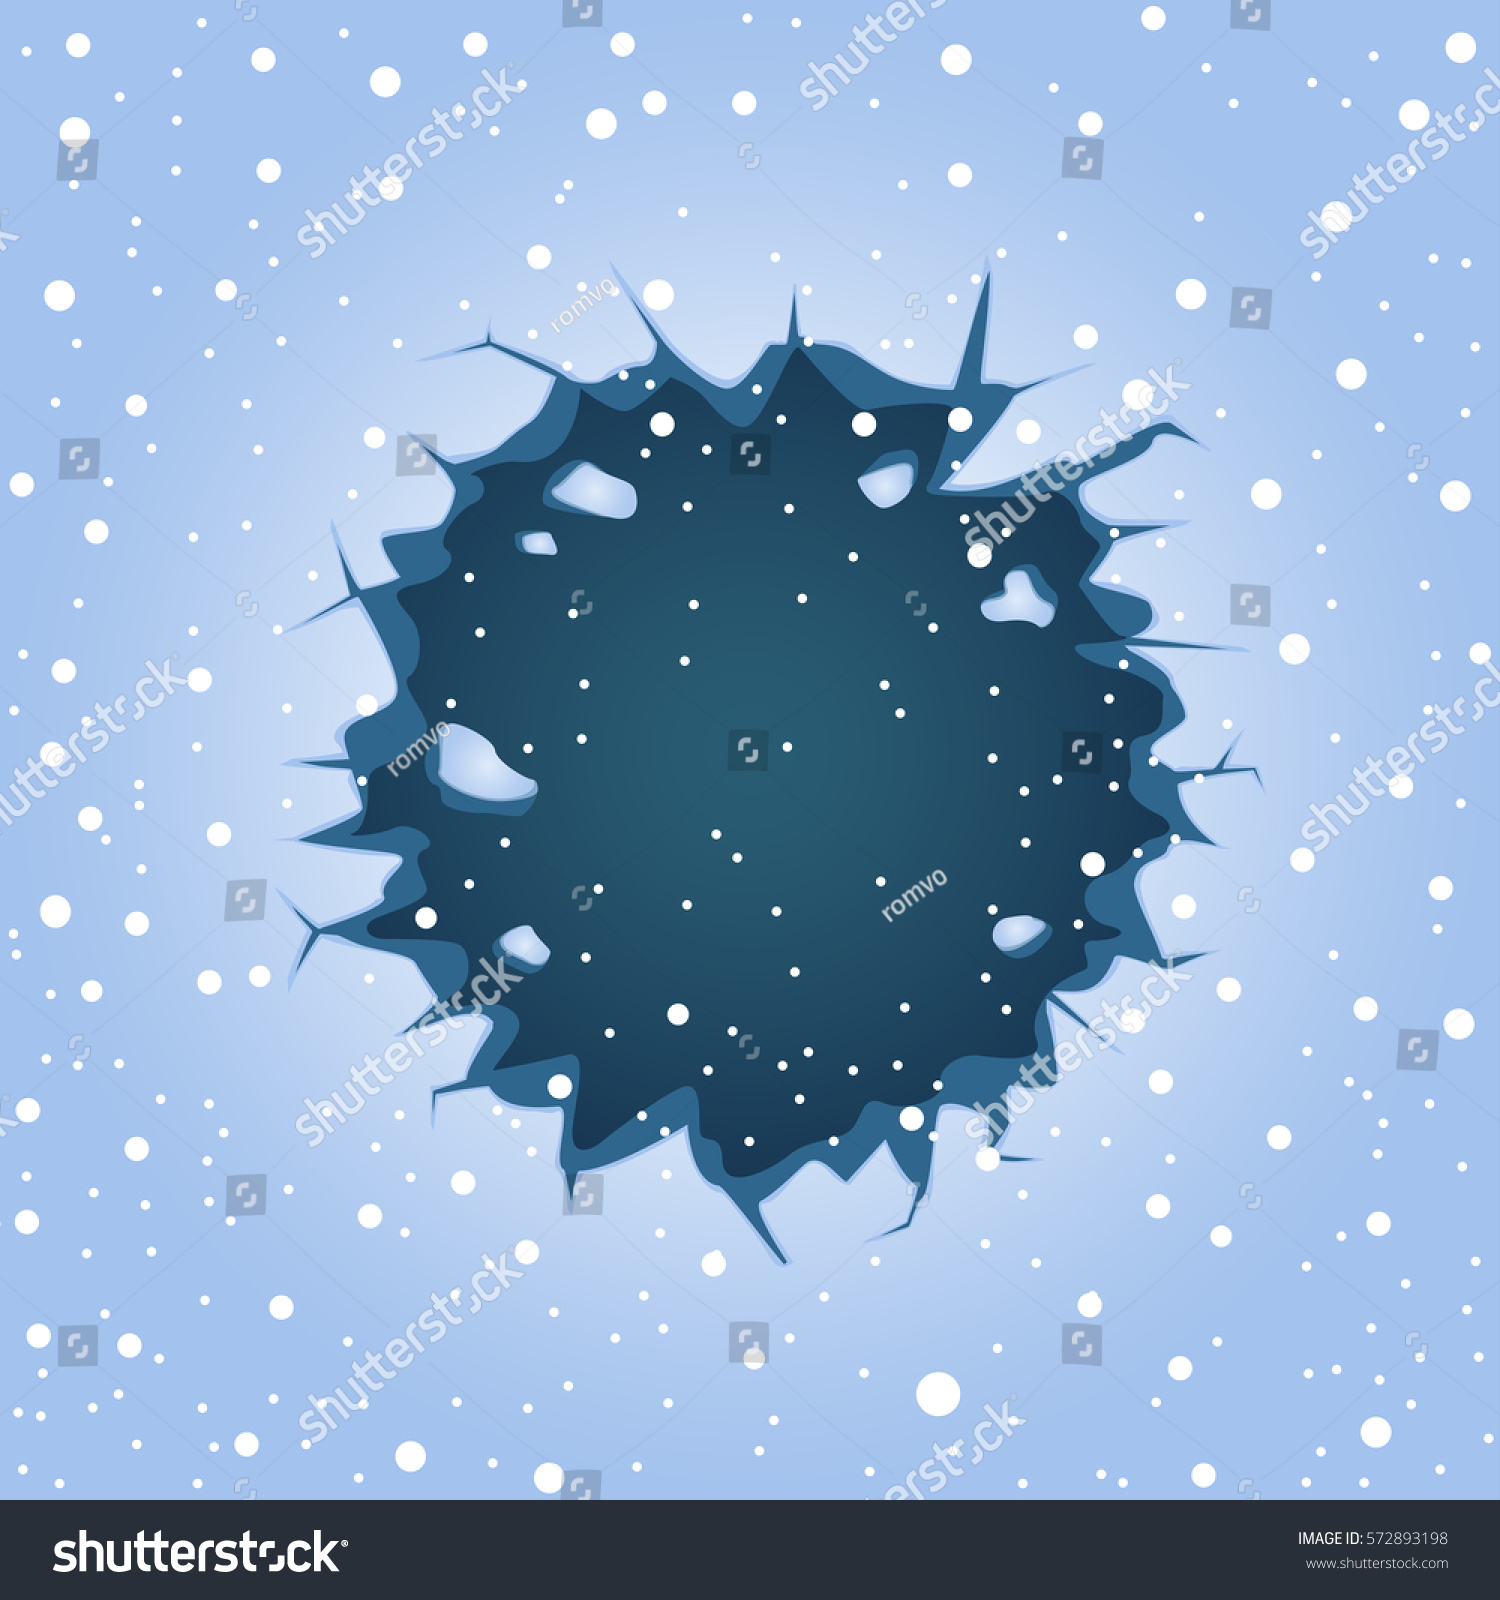 Download Big Round Blue Ice Hole Crack Stock Vector 572893198 ...